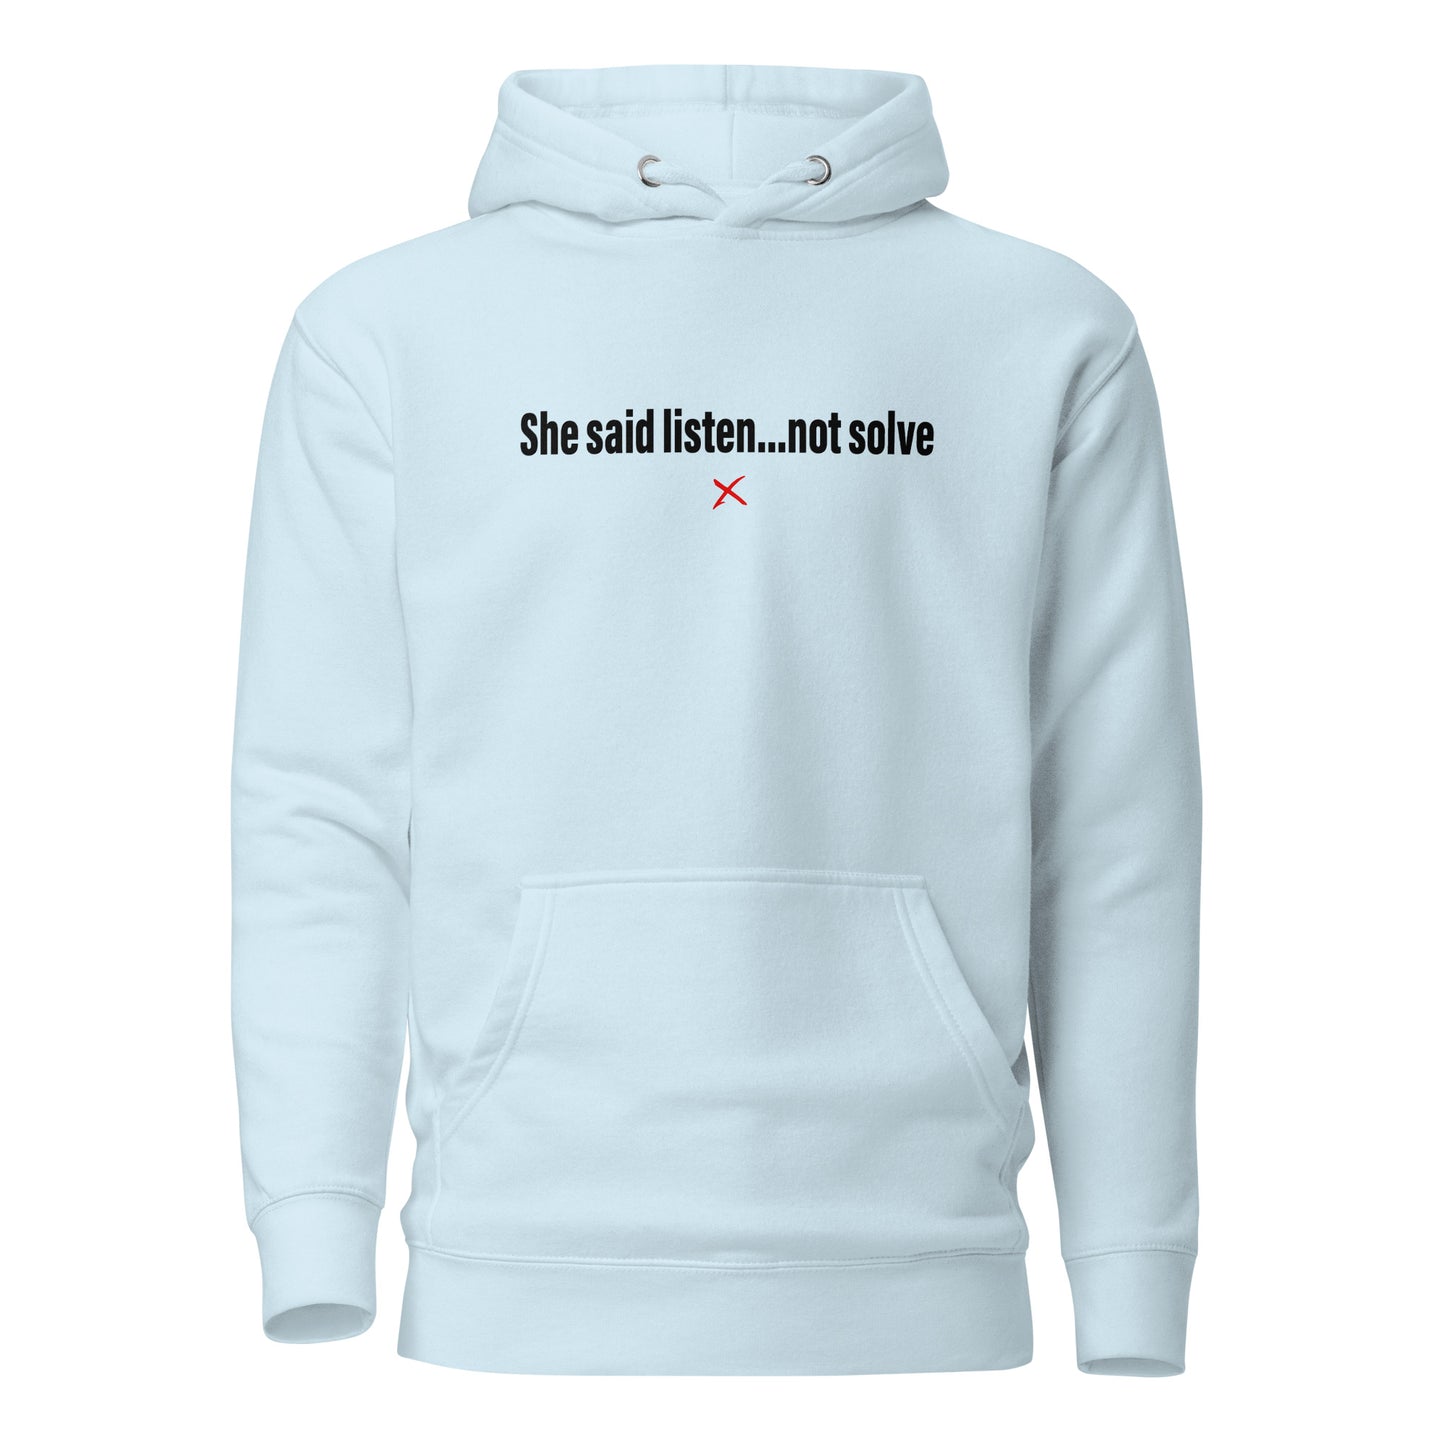 She said listen...not solve - Hoodie